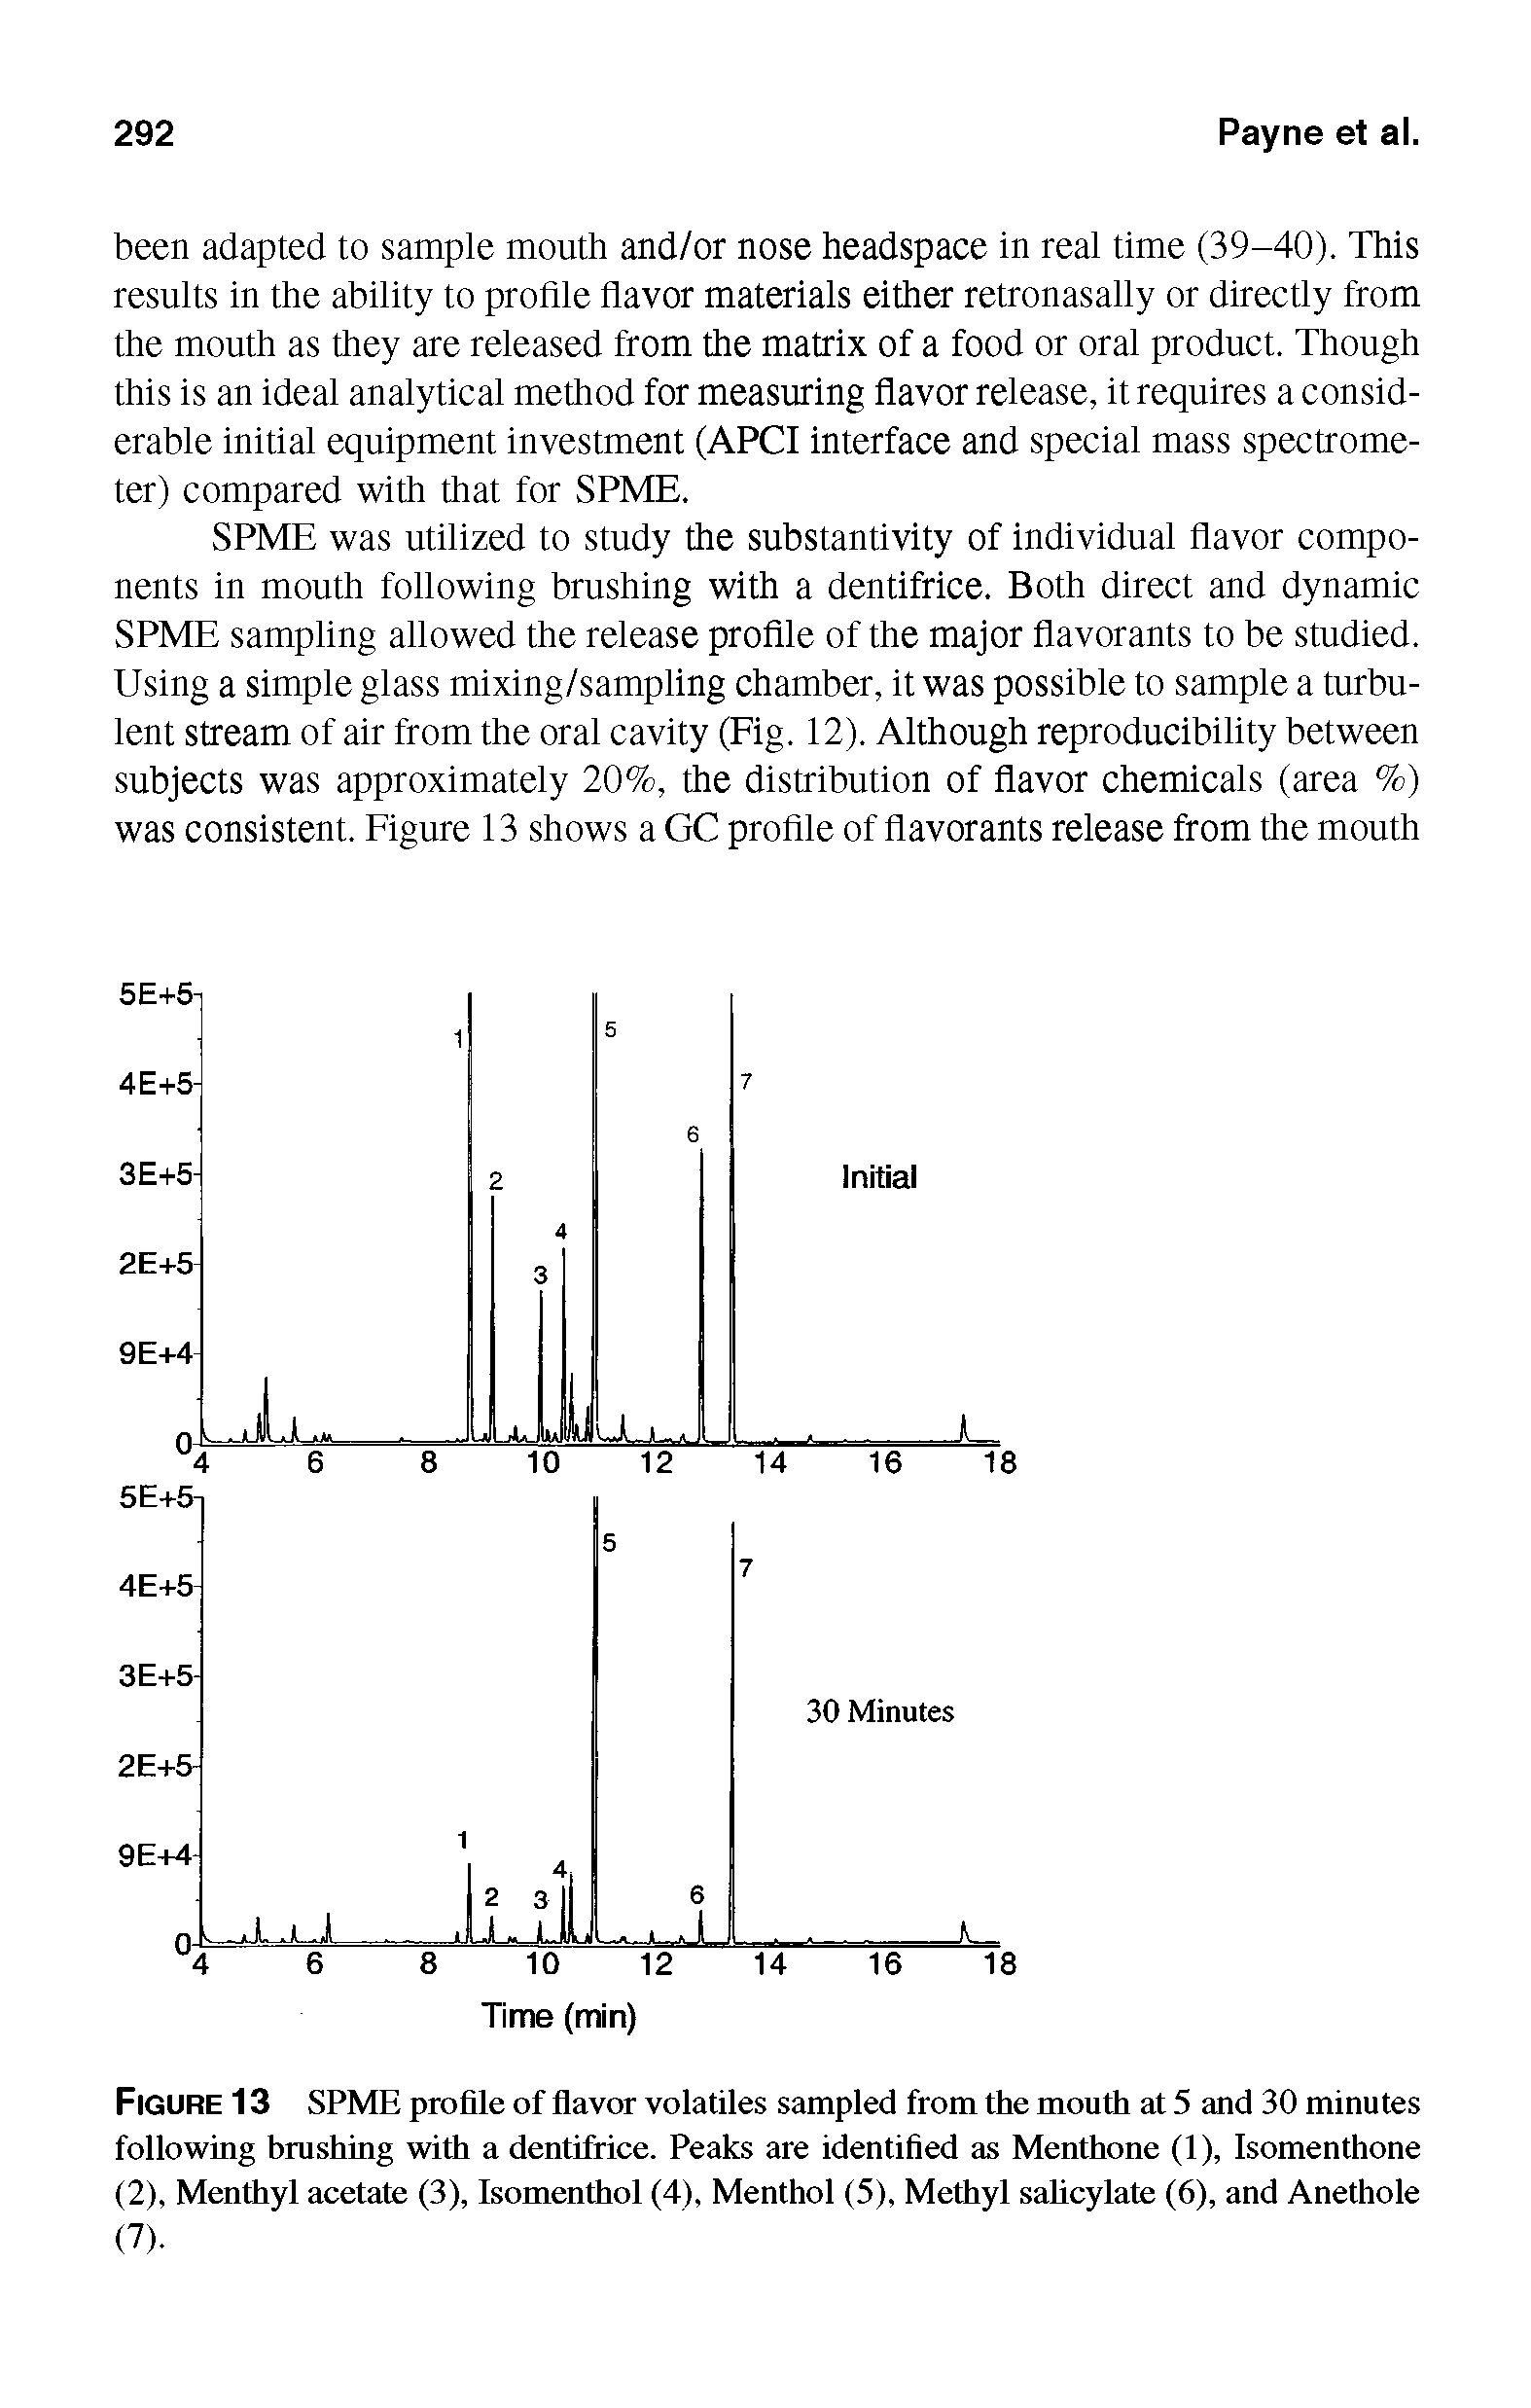 Figure 13 SPME profile of flavor volatiles sampled from the mouth at 5 and 30 minutes following brushing with a dentifrice. Peaks are identified as Menthone (1), Isomenthone (2), Menthyl acetate (3), Isomenthol (4), Menthol (5), Methyl sahcylate (6), and Anethole (7).